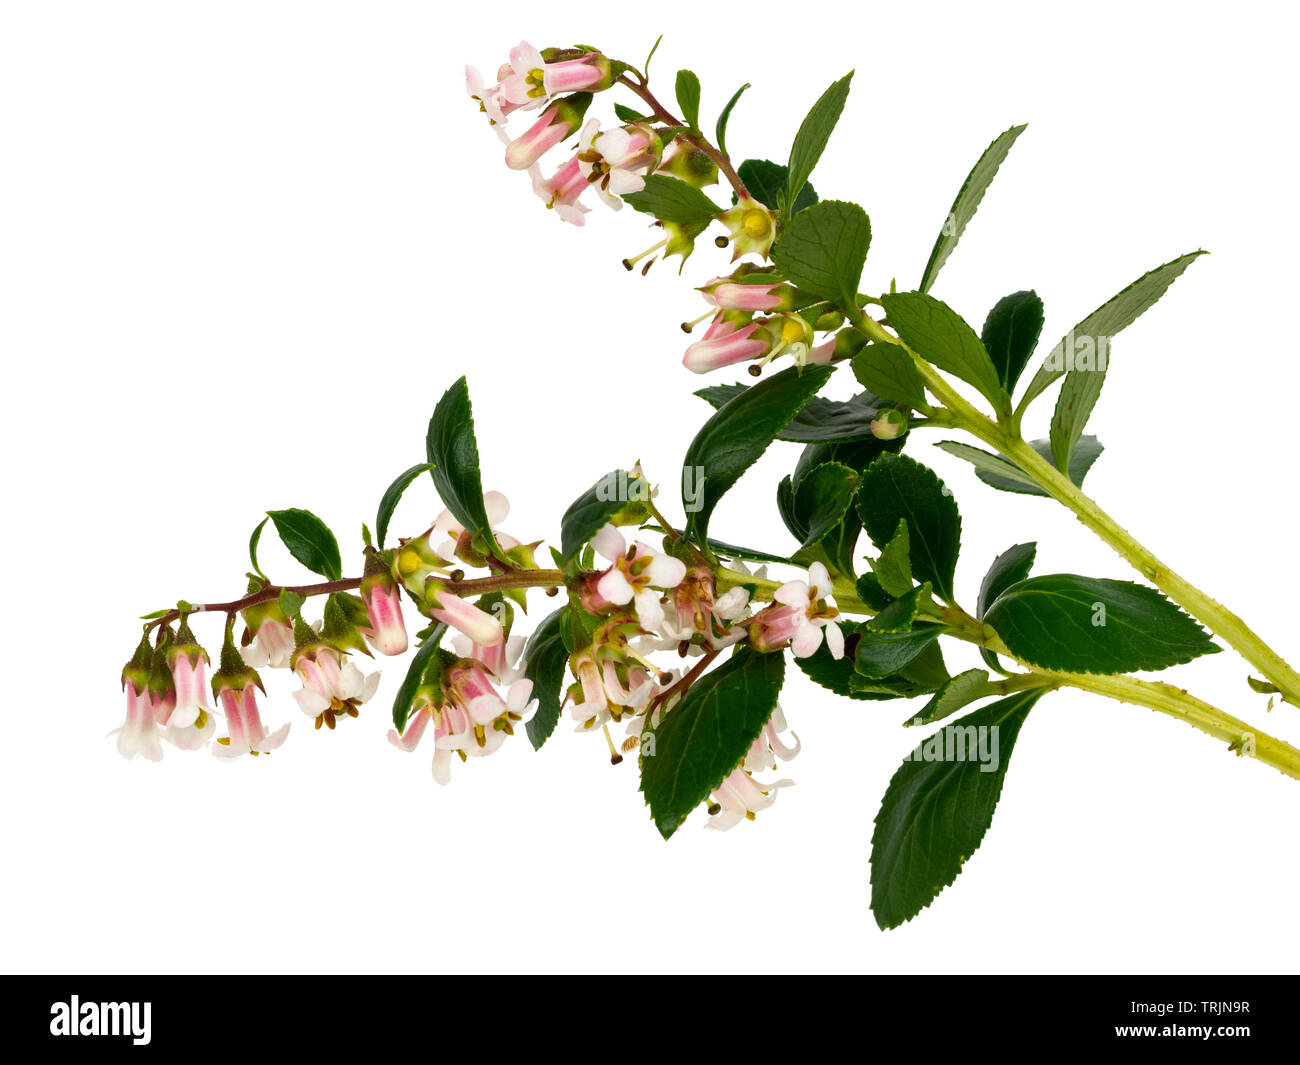 Summer panicles of the pale pink and white flowered evergreen hedging shrub, Escallonia 'Apple Blossom' on a white background Stock Photo